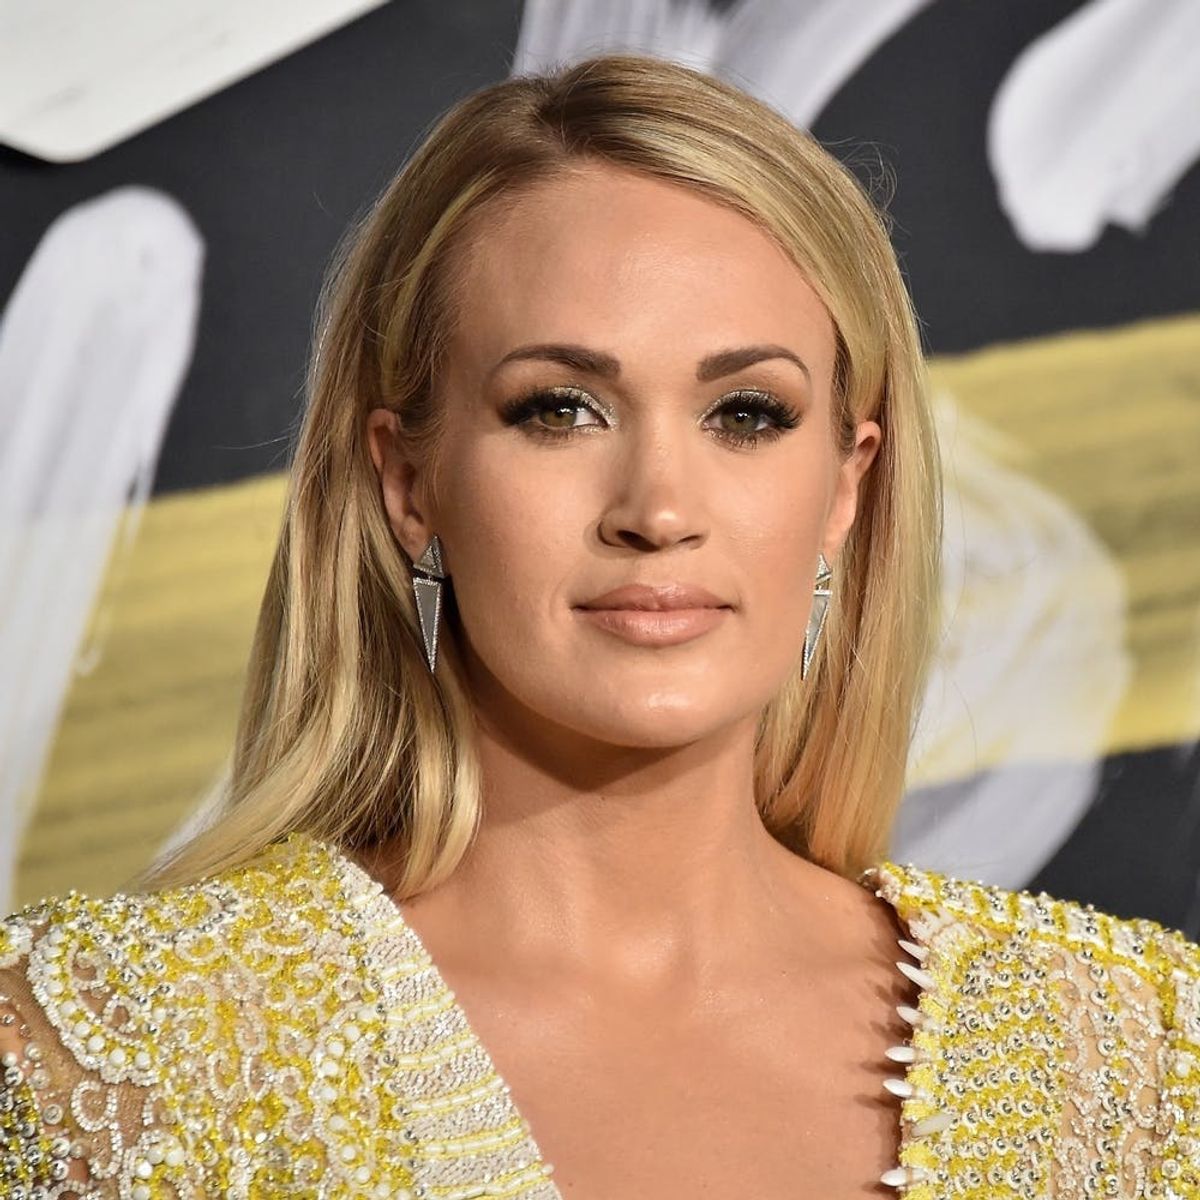 Carrie Underwood Opens Up About Her ‘Soul-Searching Year’: I Had ‘More Downs Than Ups’